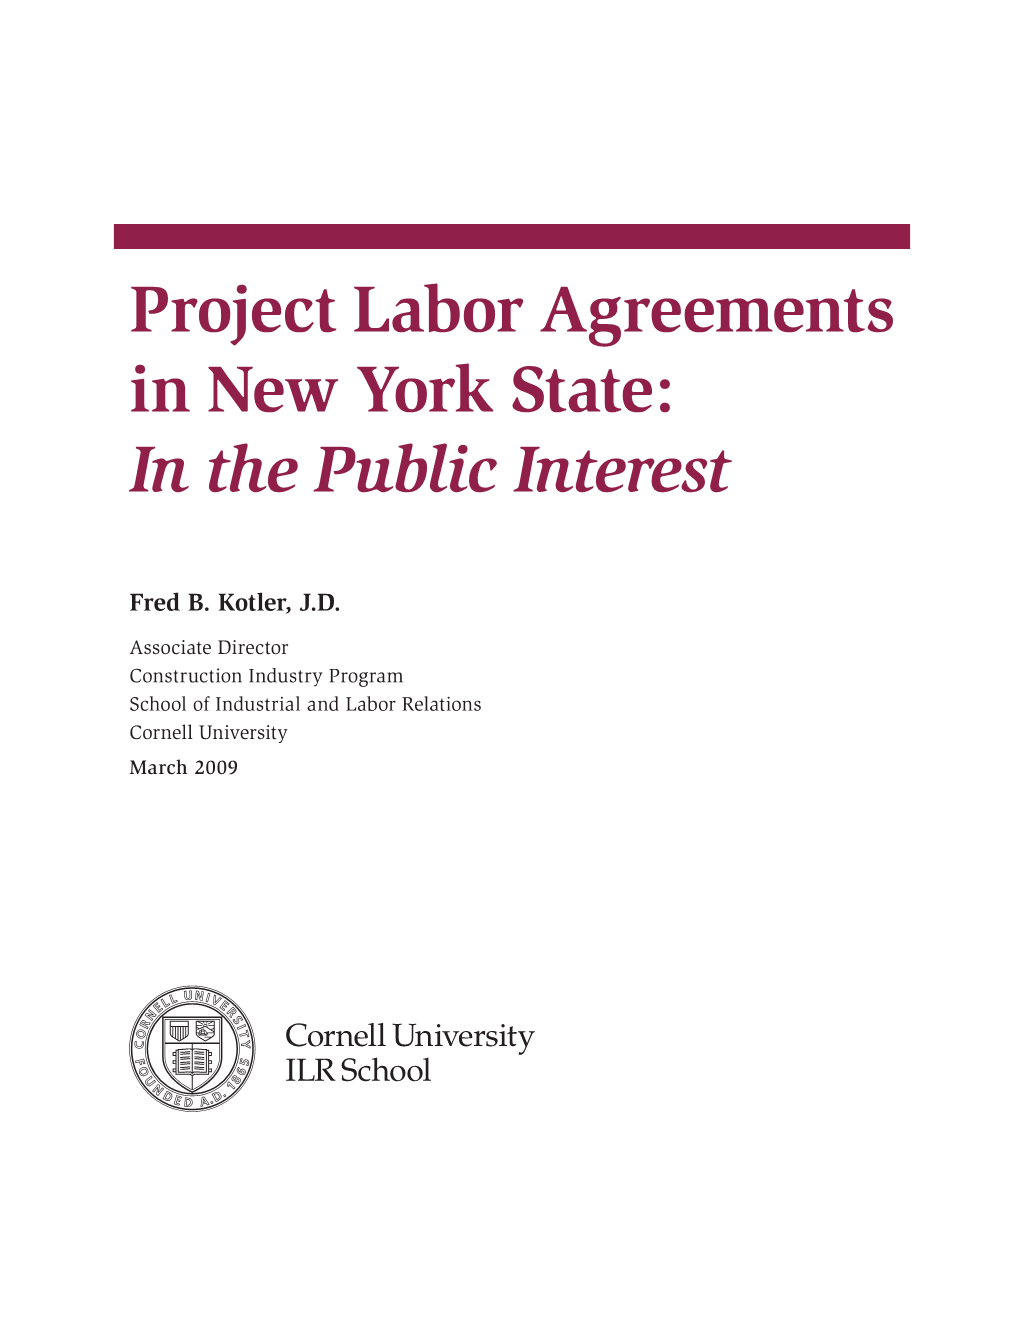 Project Labor Agreements in New York State: in the Public Interest